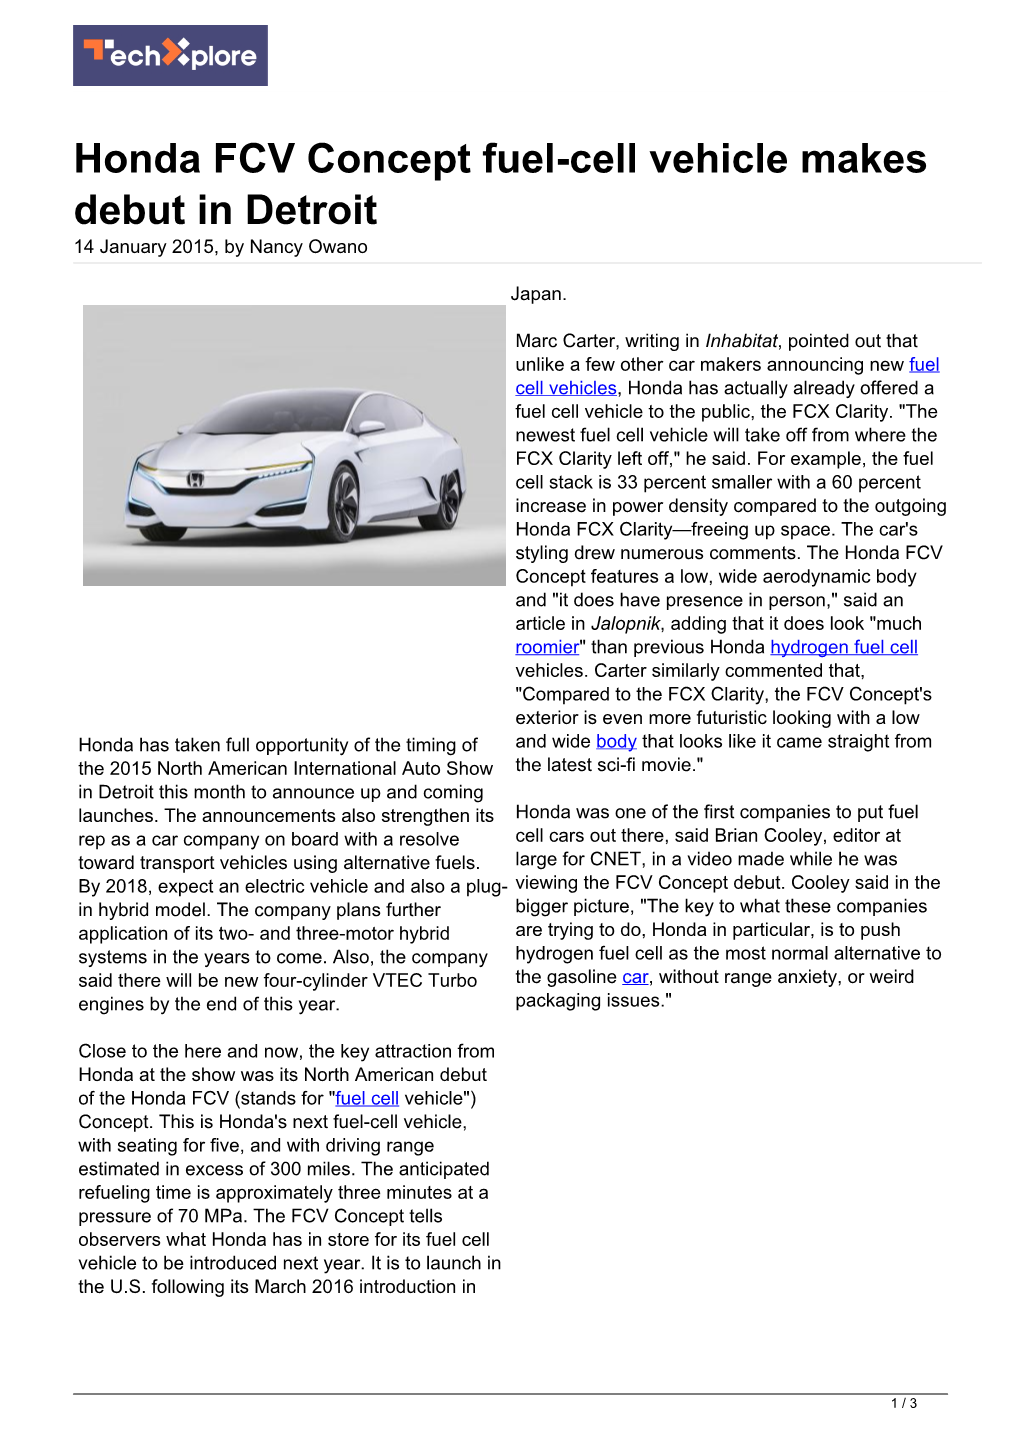 Honda FCV Concept Fuel-Cell Vehicle Makes Debut in Detroit 14 January 2015, by Nancy Owano